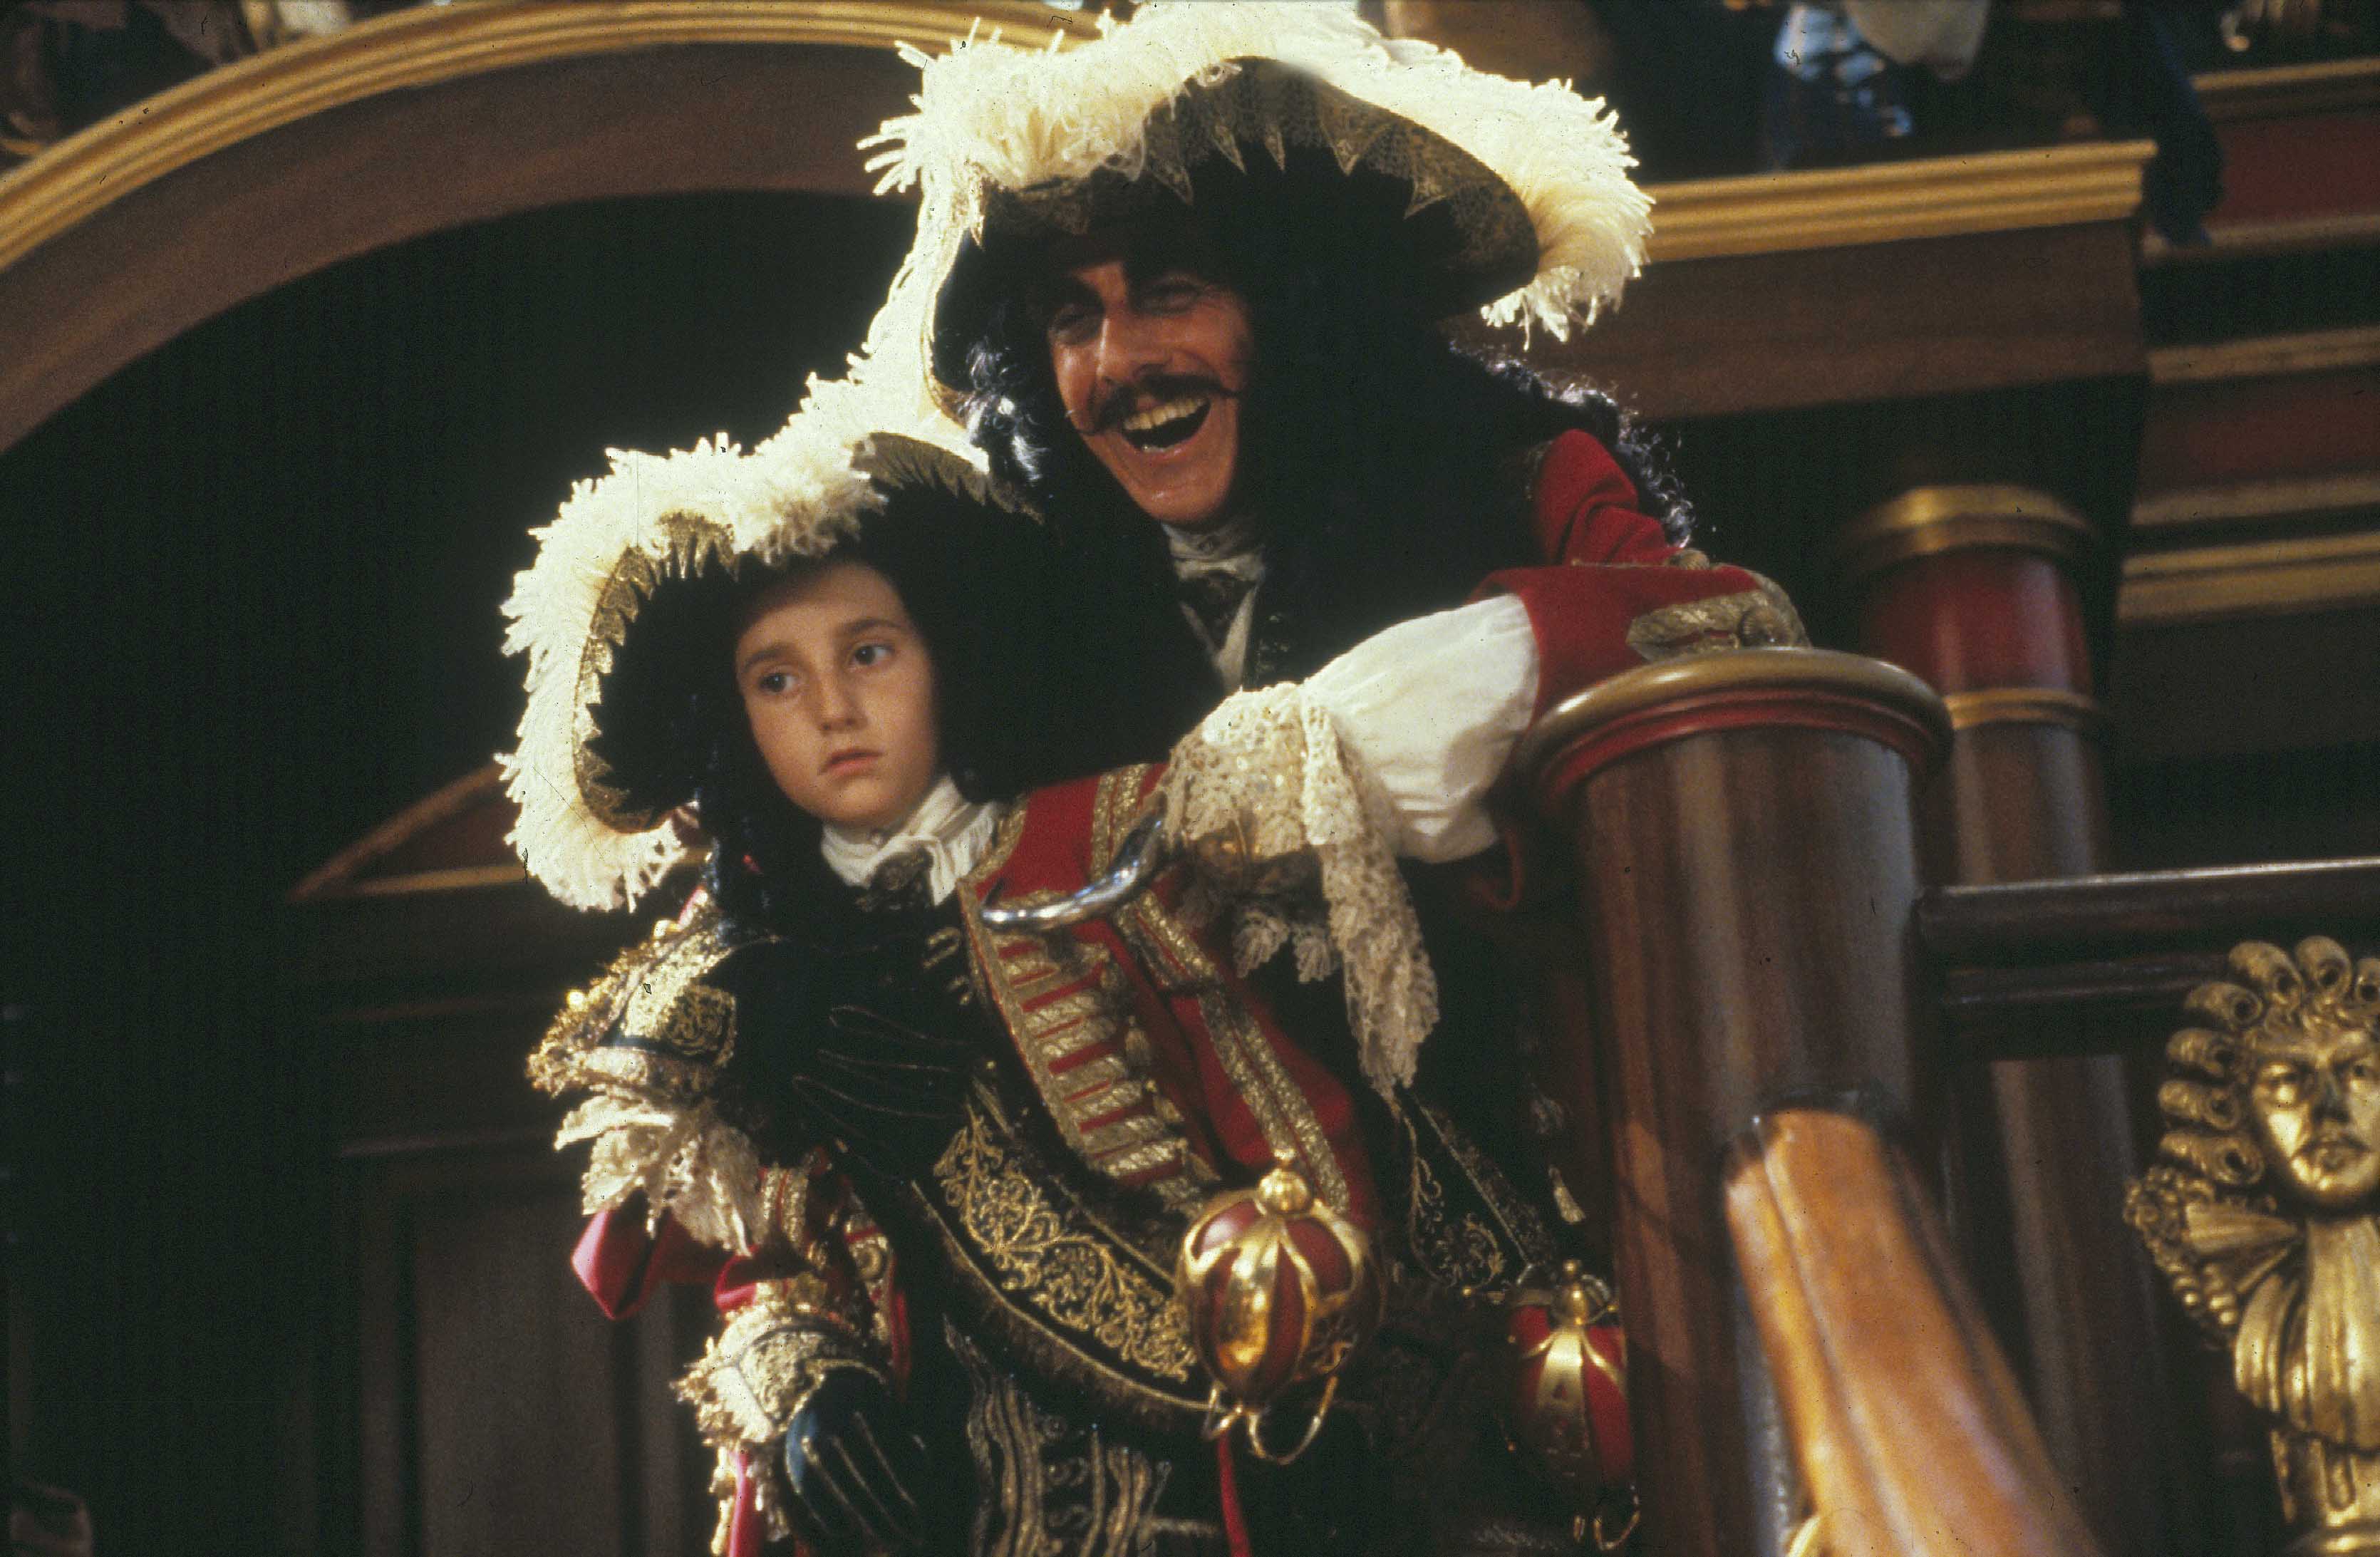 <p>Charlie Korsmo had a whirlwind career in Hollywood, starring in six movies in 1990 and 1991 including "What About Bob?" and "Hook" (pictured). Pretty impressive for a pre-teen, huh?</p>